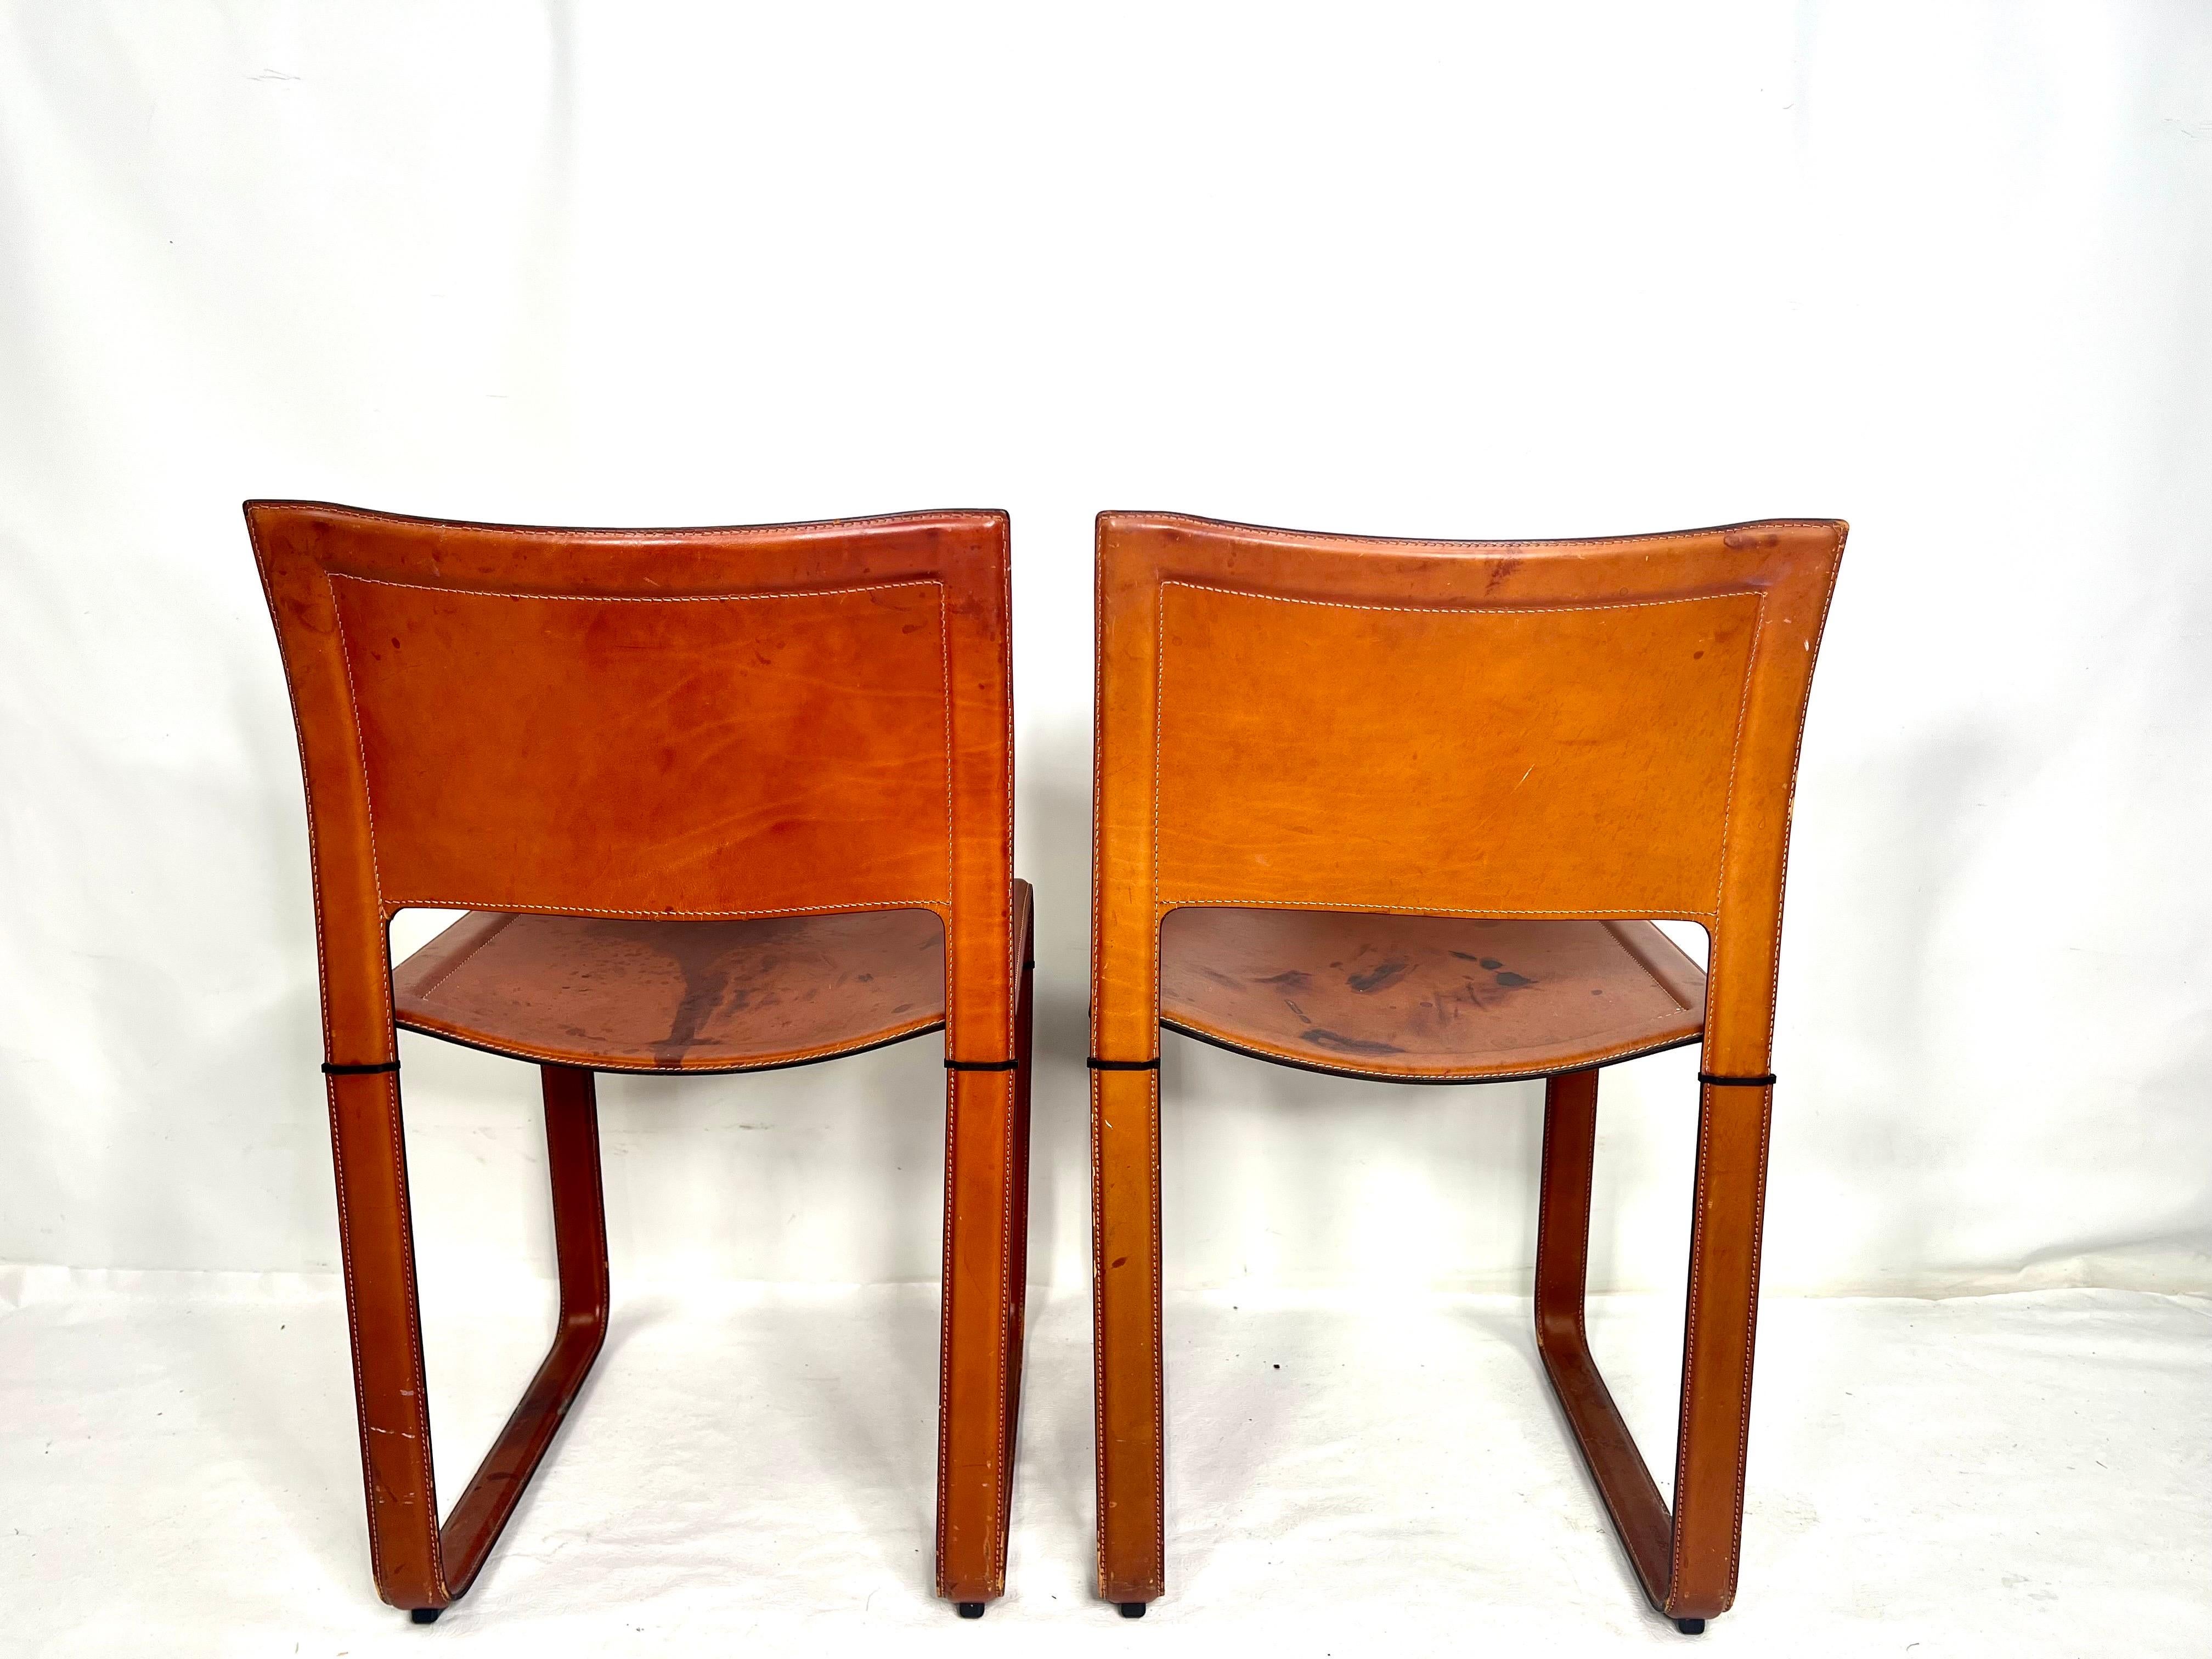 Late 20th Century Vintage Modern Matteo Grassi Red Leather Chairs, a Pair For Sale